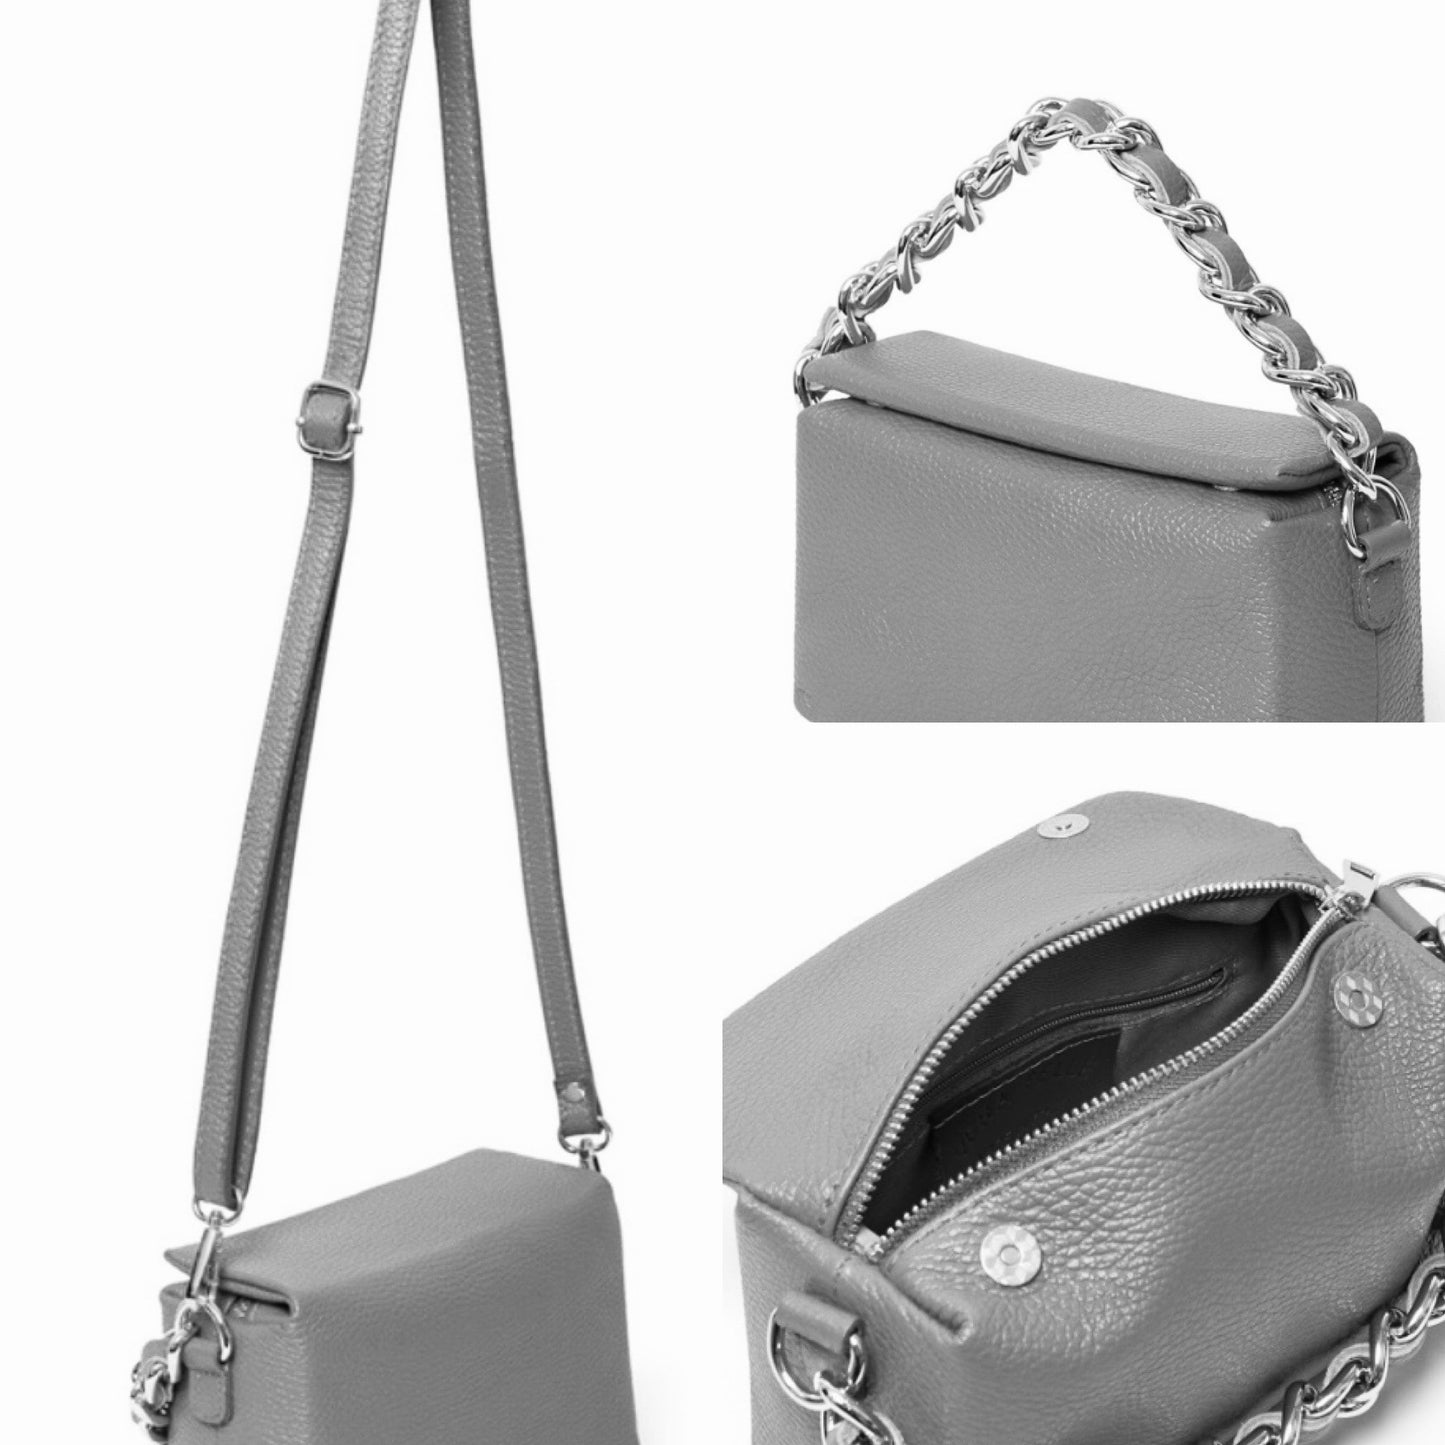 Blue Boxy Bag With Chain Handle - Erin